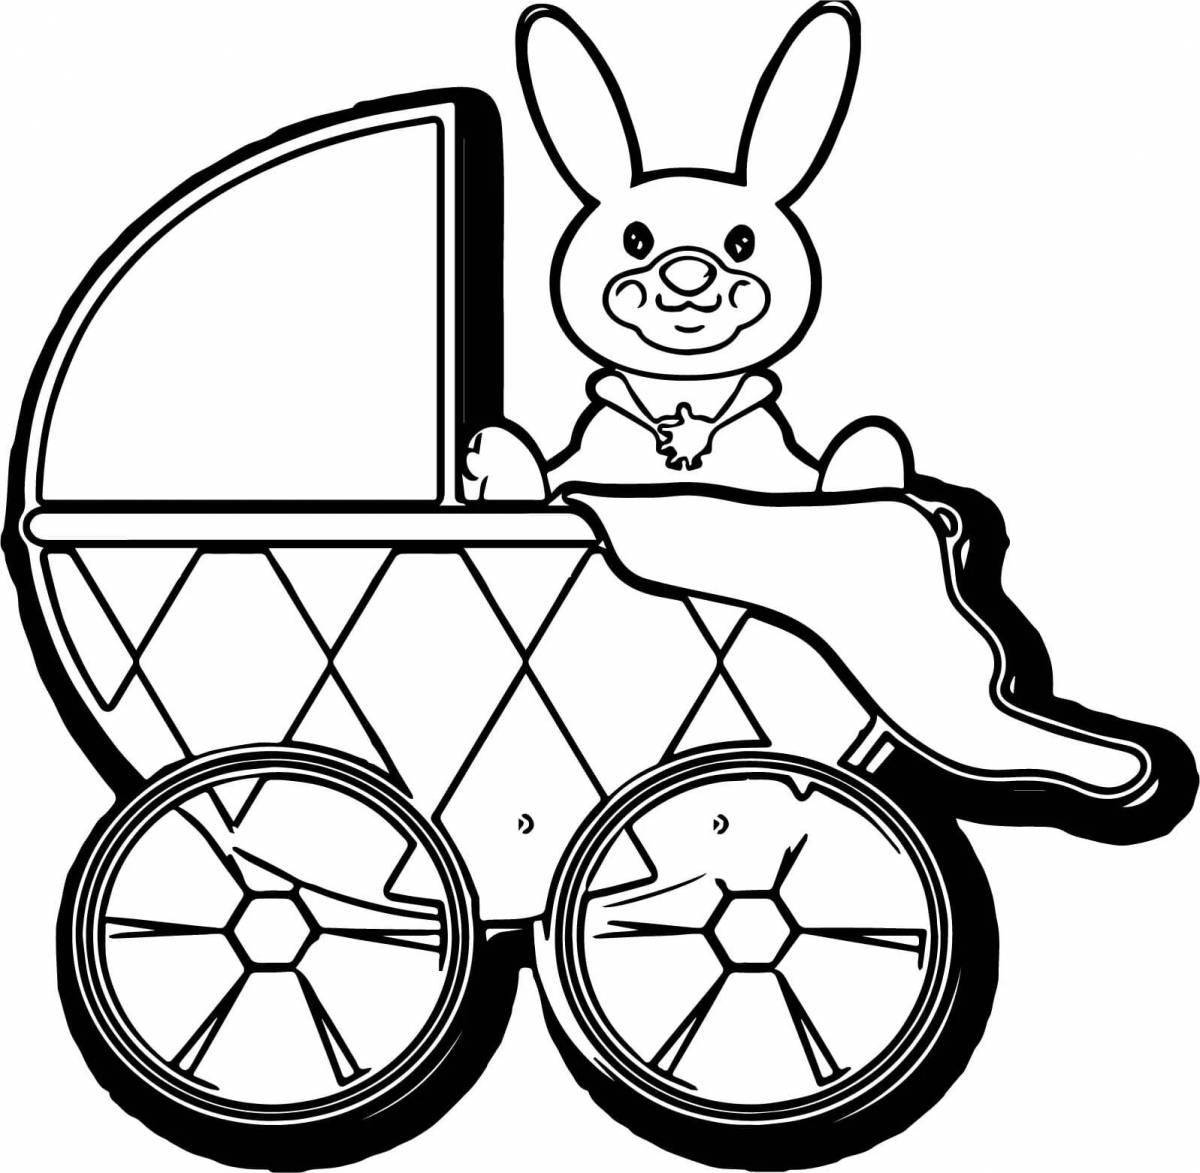 Snuggable coloring page bunny doll